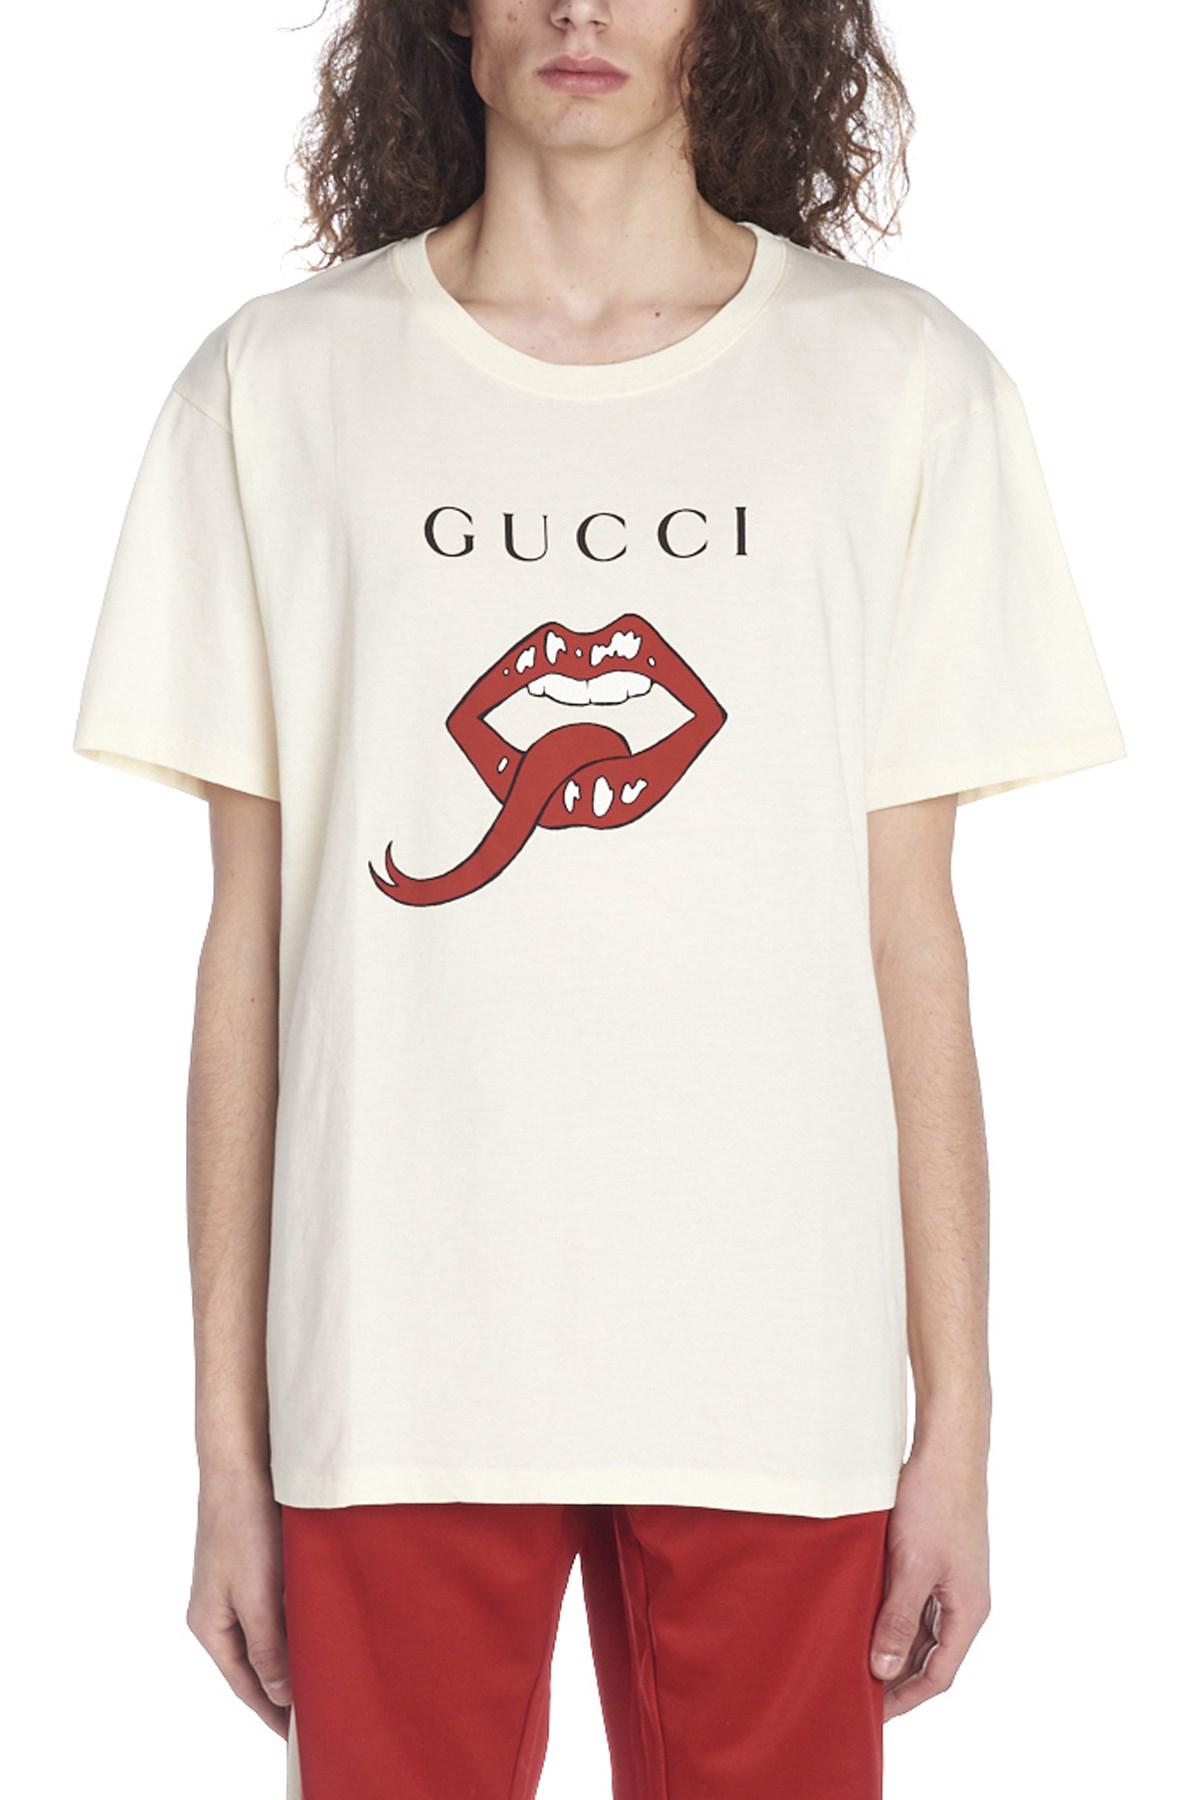 gucci mouth tee